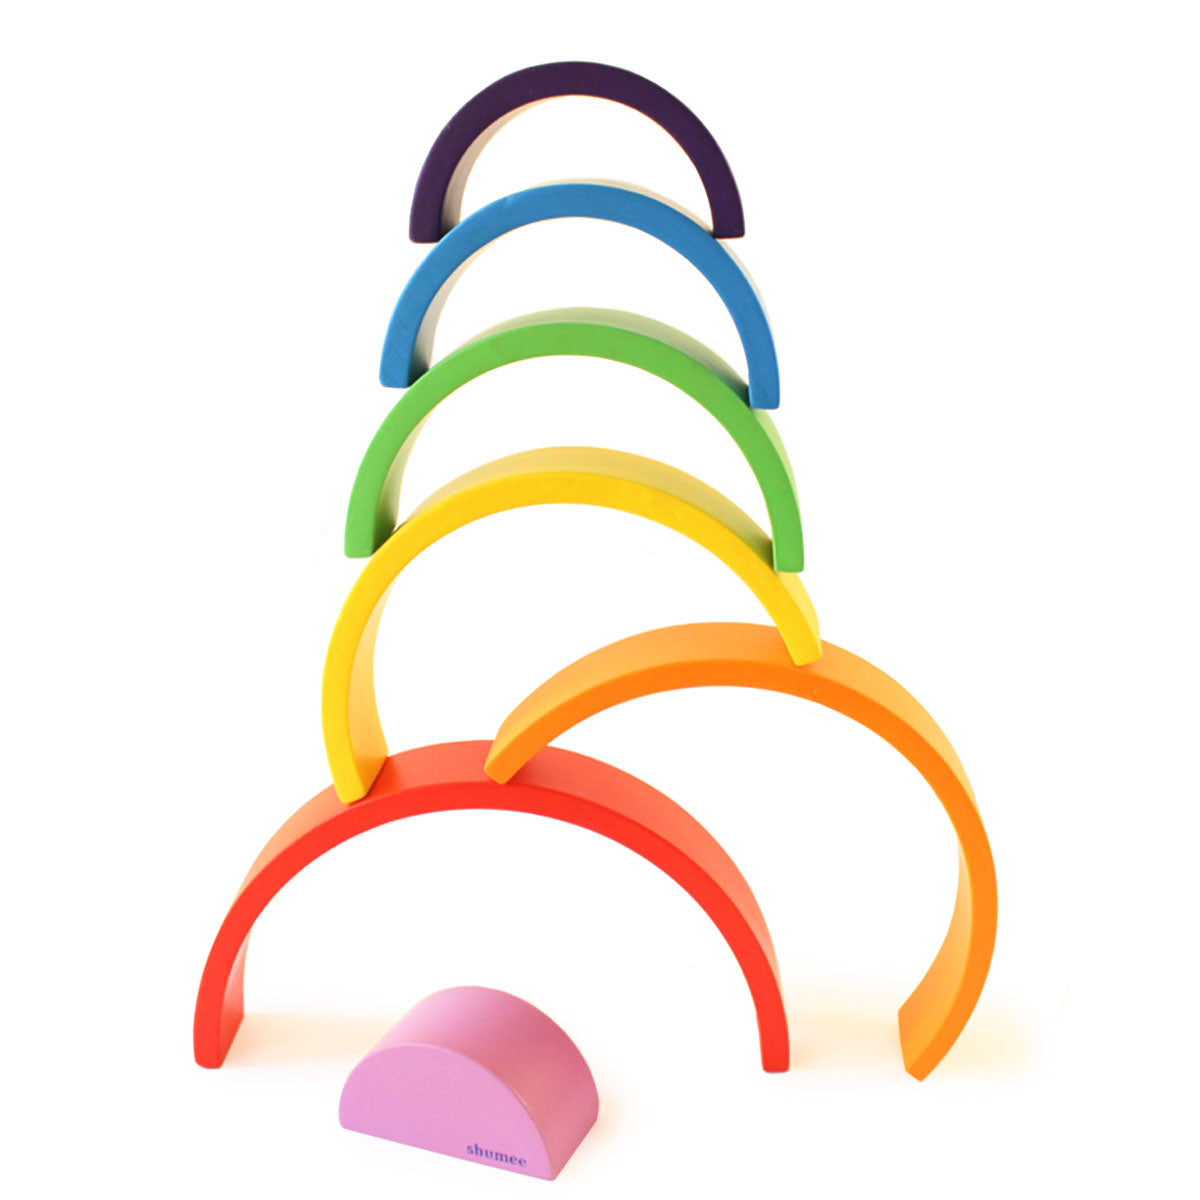 Wooden Rainbow Arc - Colourful Wooden Arch Stacking Toy for Kids for 1. ...